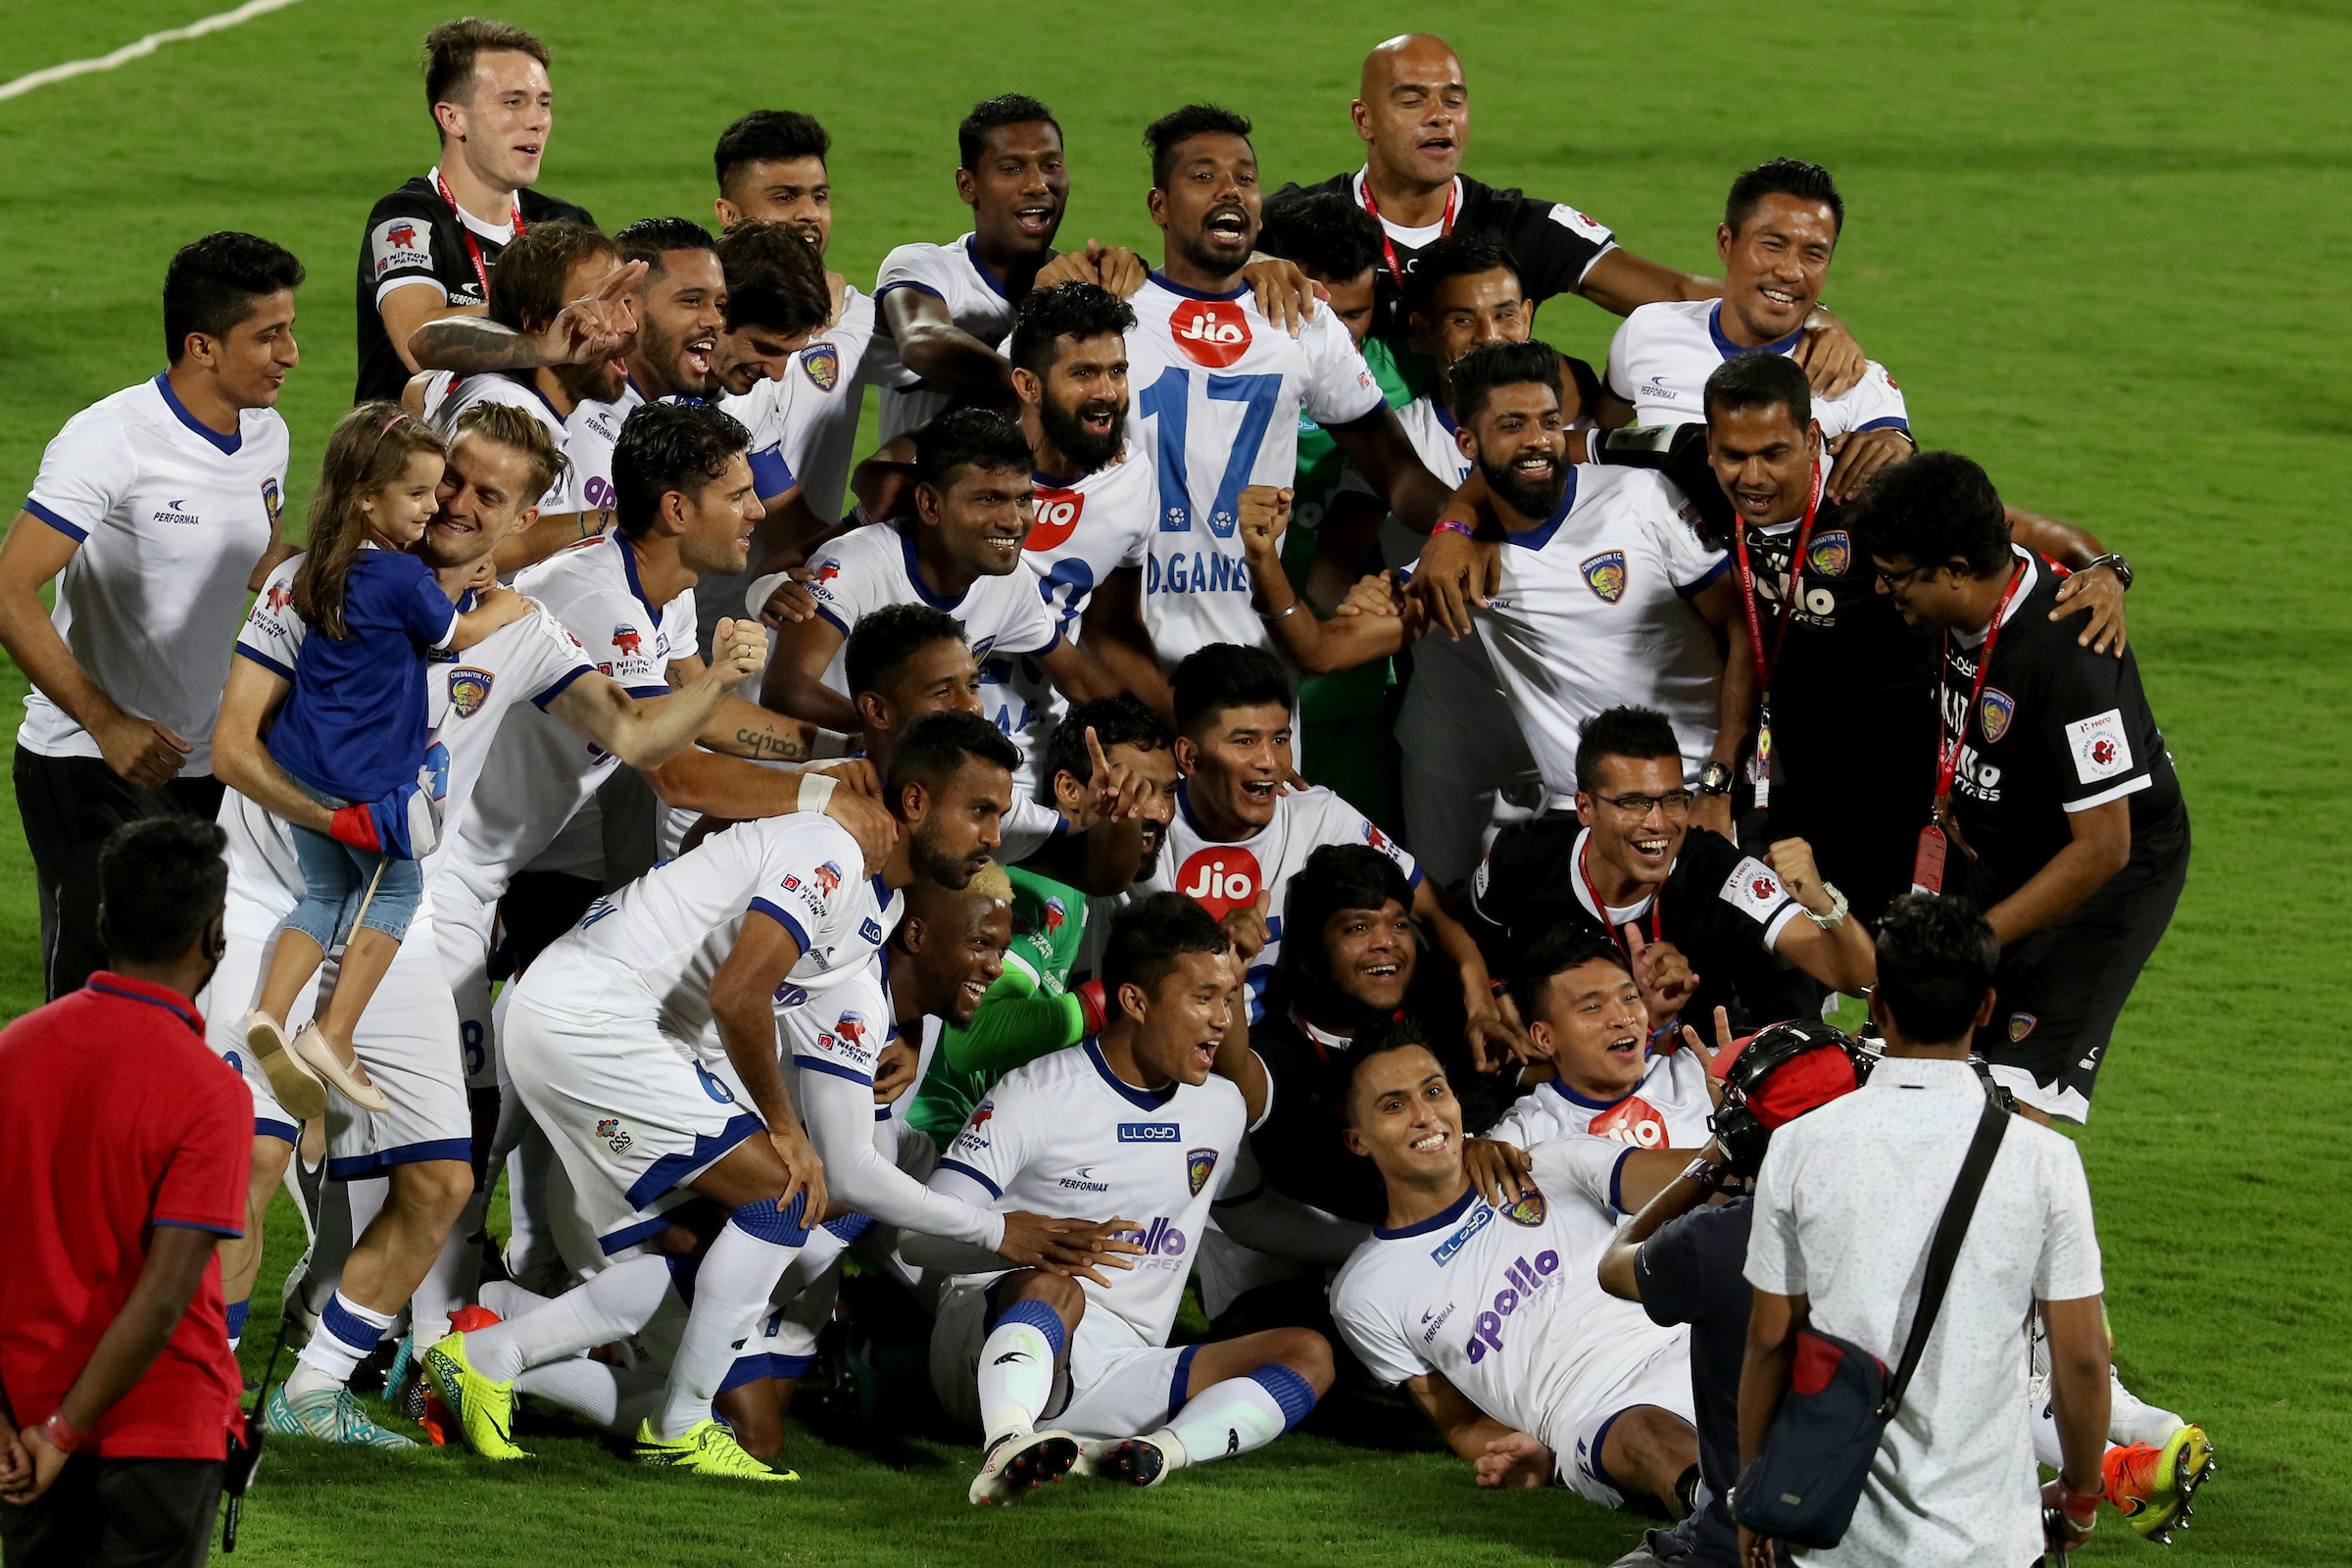 ISL Final Jeje Lalpekhua on title win This is for all Chennaiyn FC